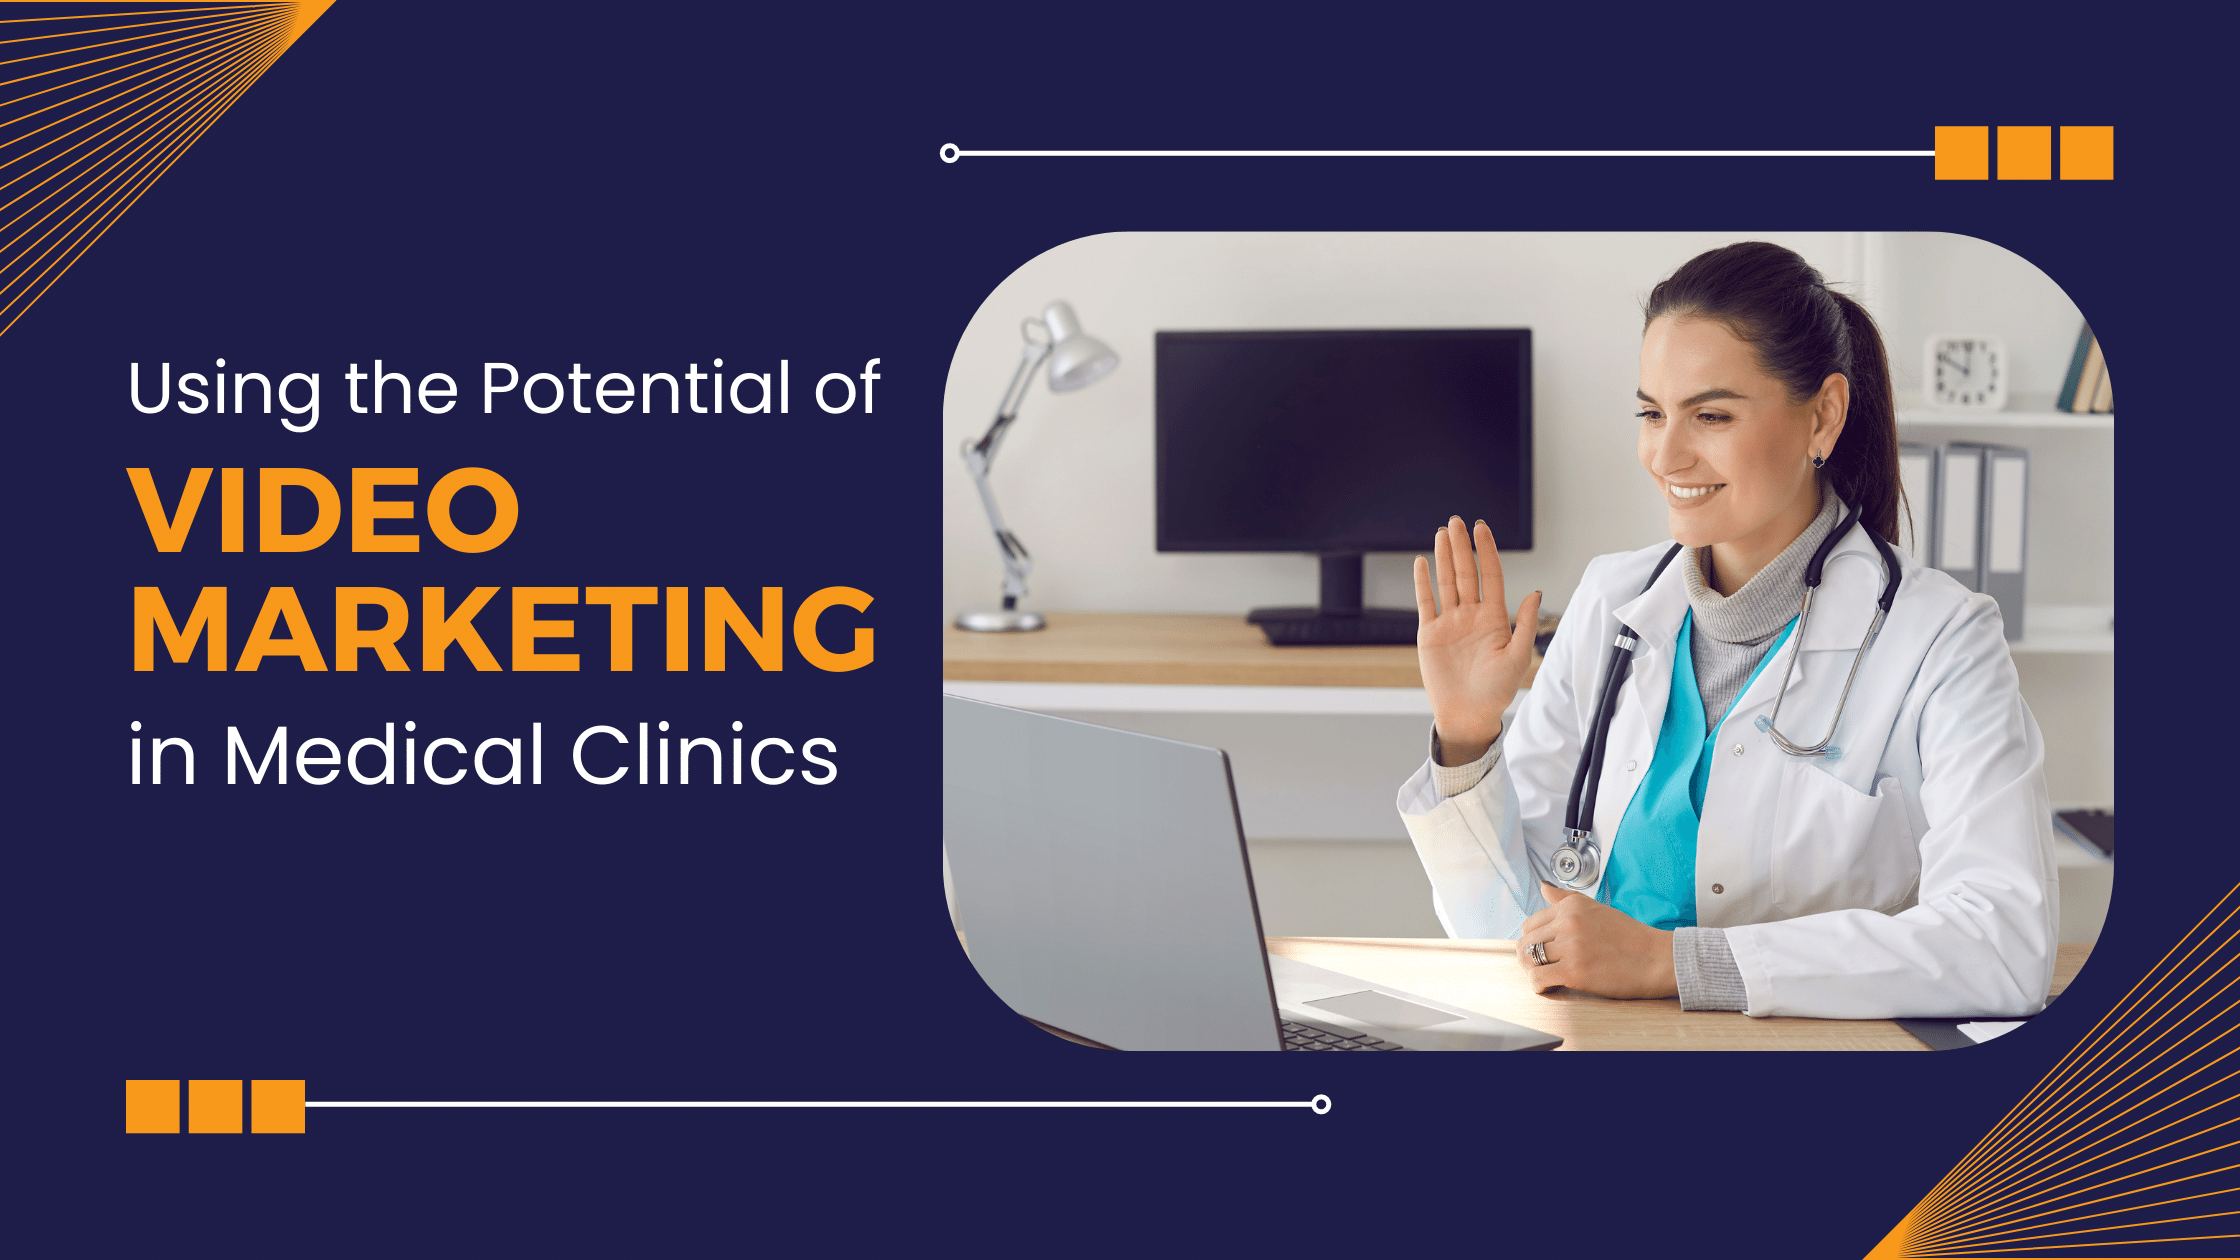 Using the Potential of Video Marketing in Medical Clinics